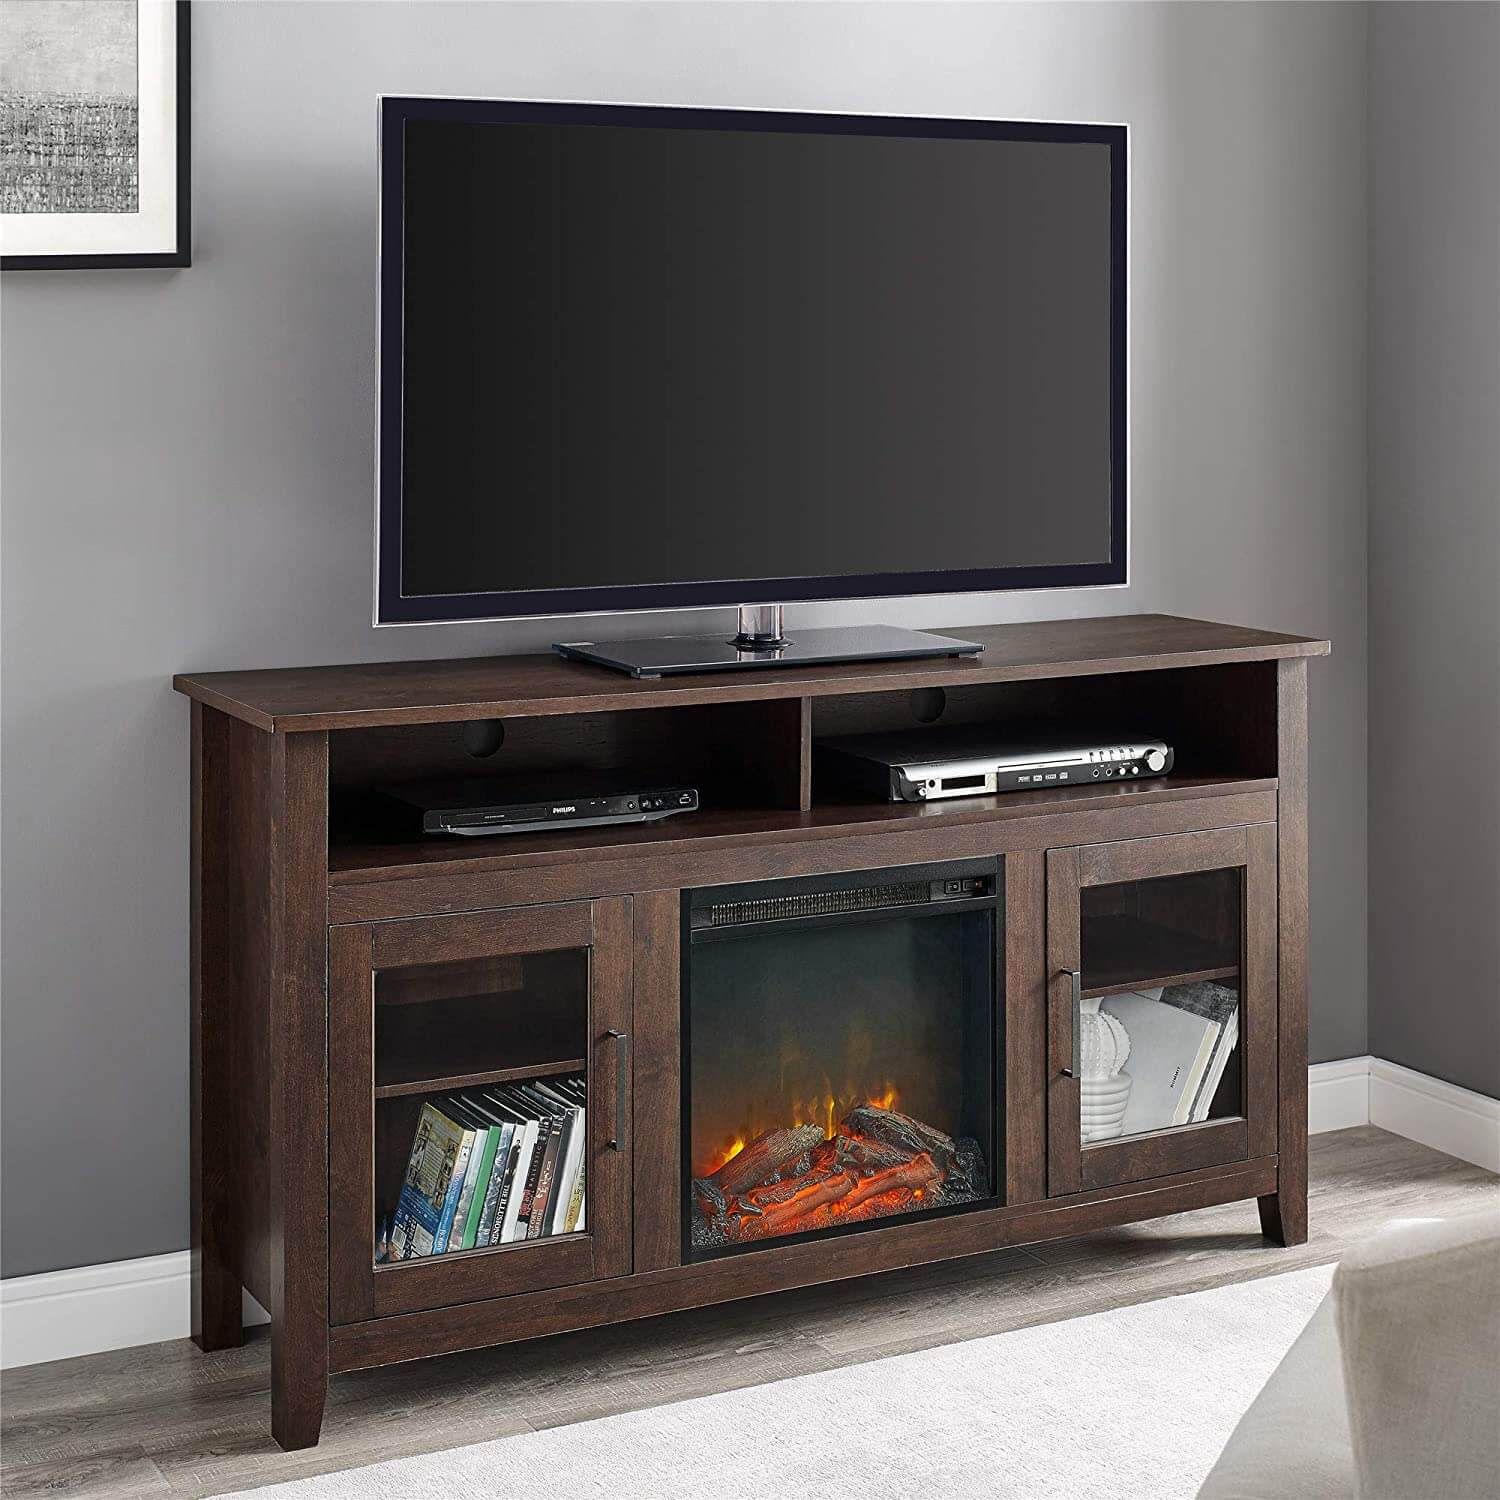 Walker Edison Rustic Wood And Glass Tall Fireplace Stand Pertaining To Walker Edison Farmhouse Tv Stands With Storage Cabinet Doors And Shelves (View 8 of 15)